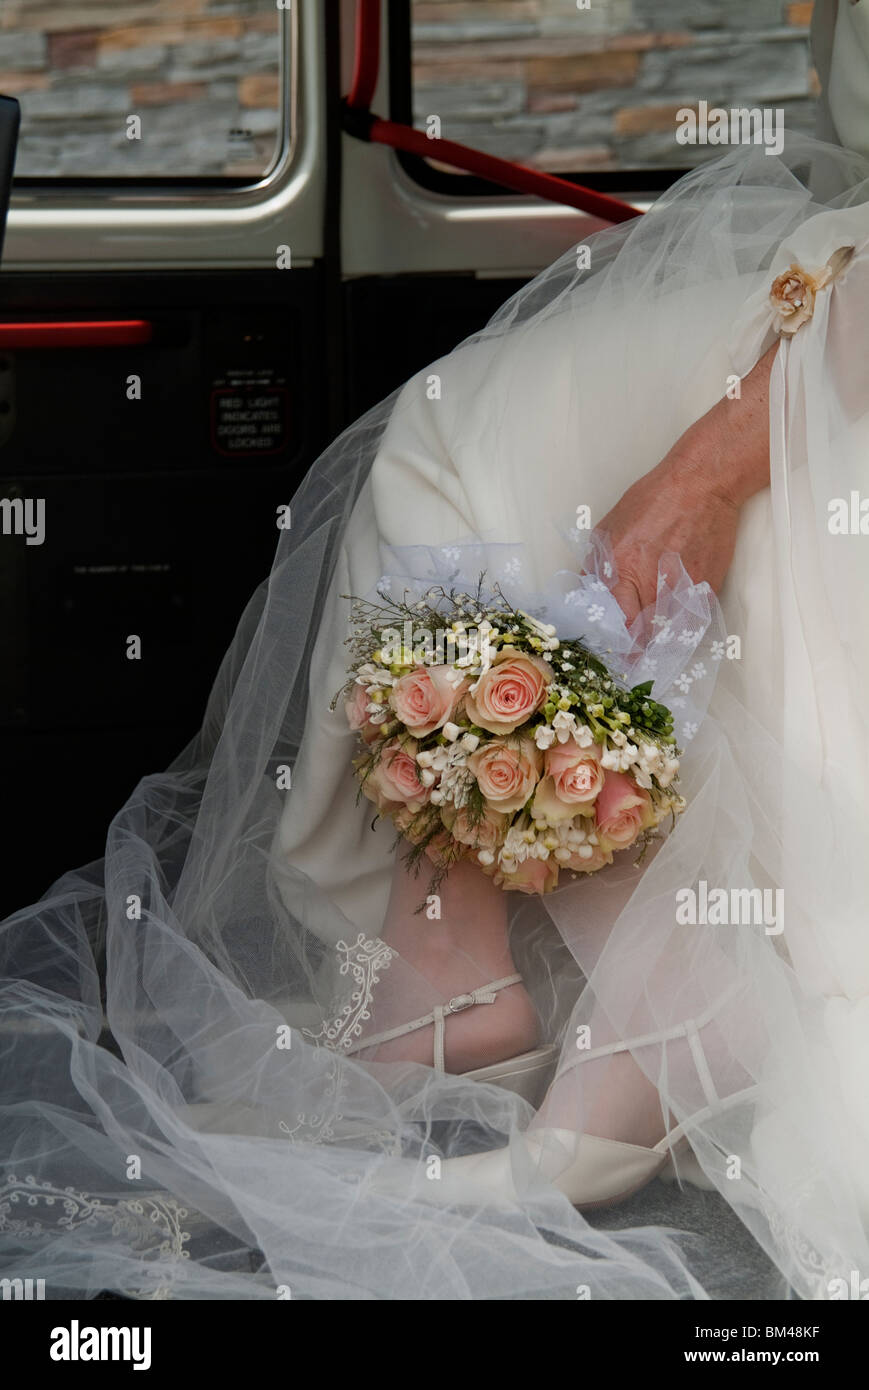 Bride with flowers bouquet inside a car Stock Photo